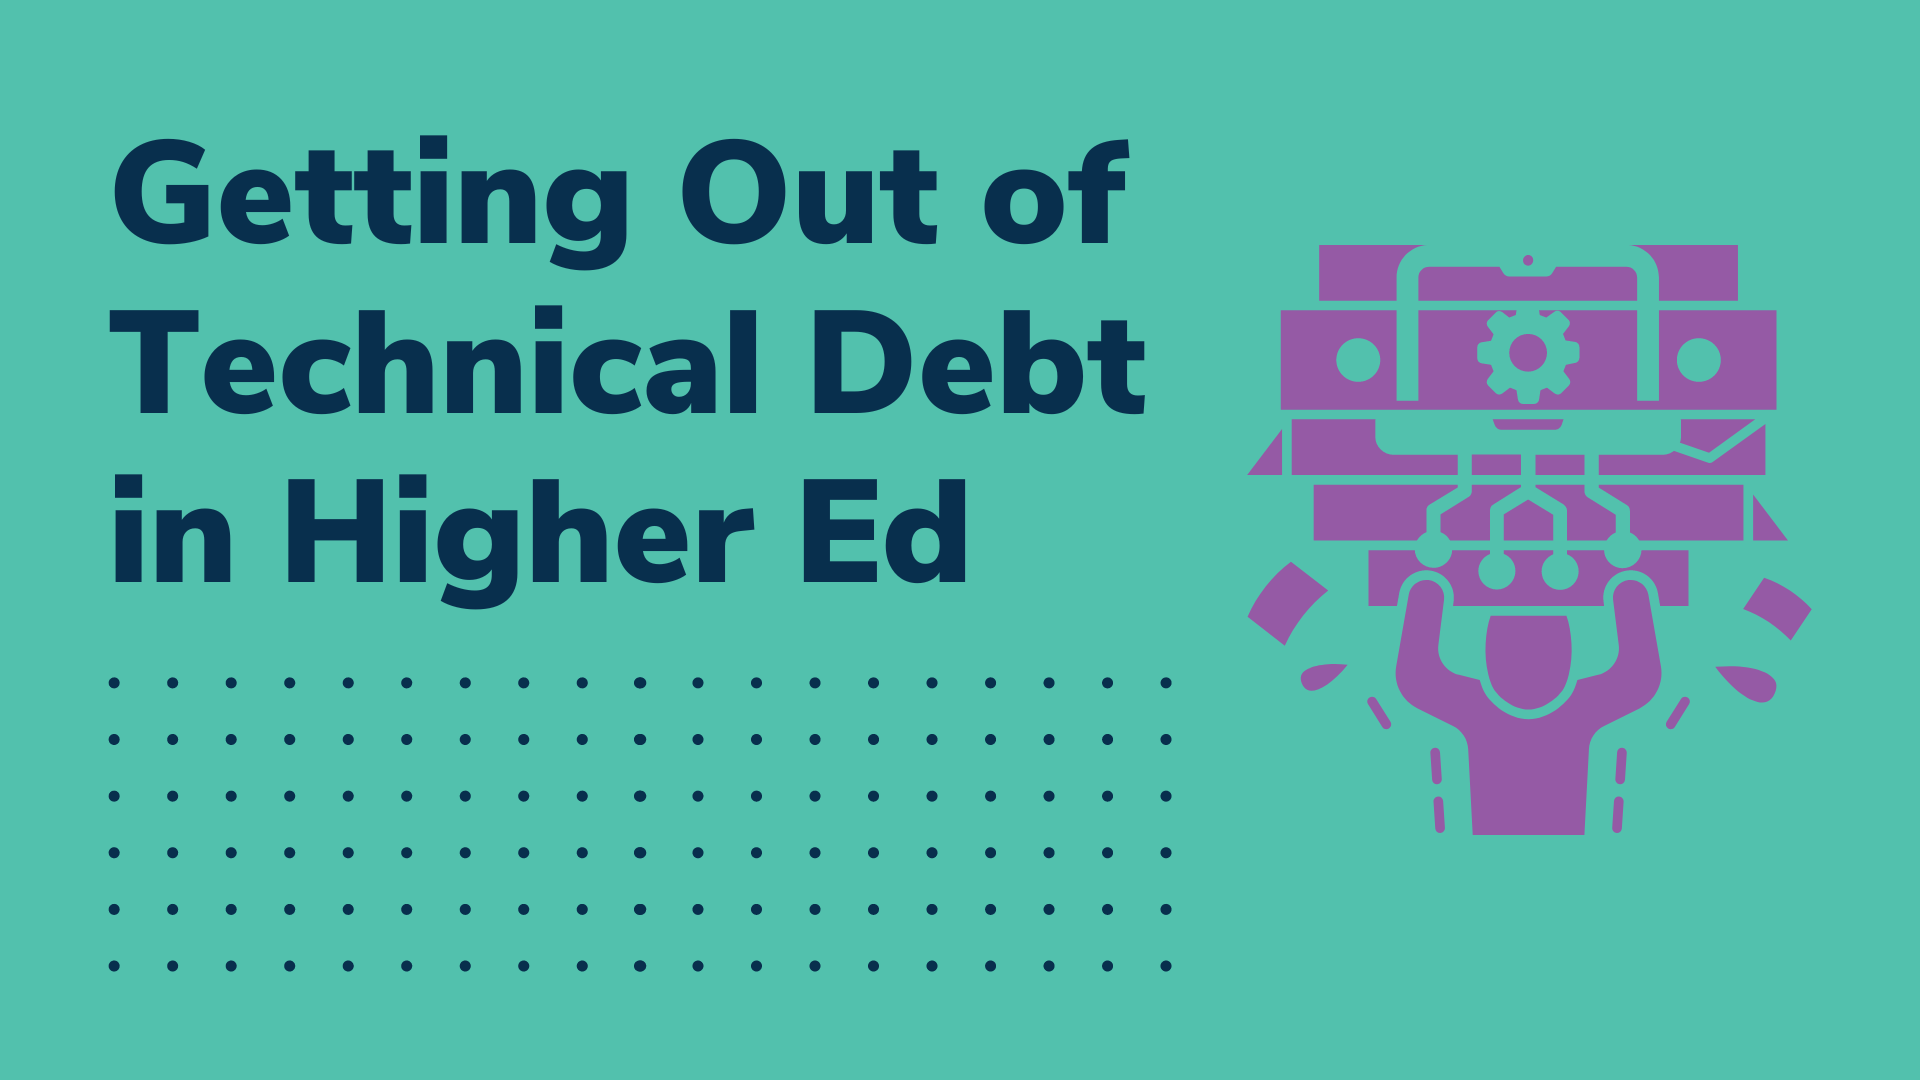 Read next post: Getting Out of Technical Debt in Higher Education